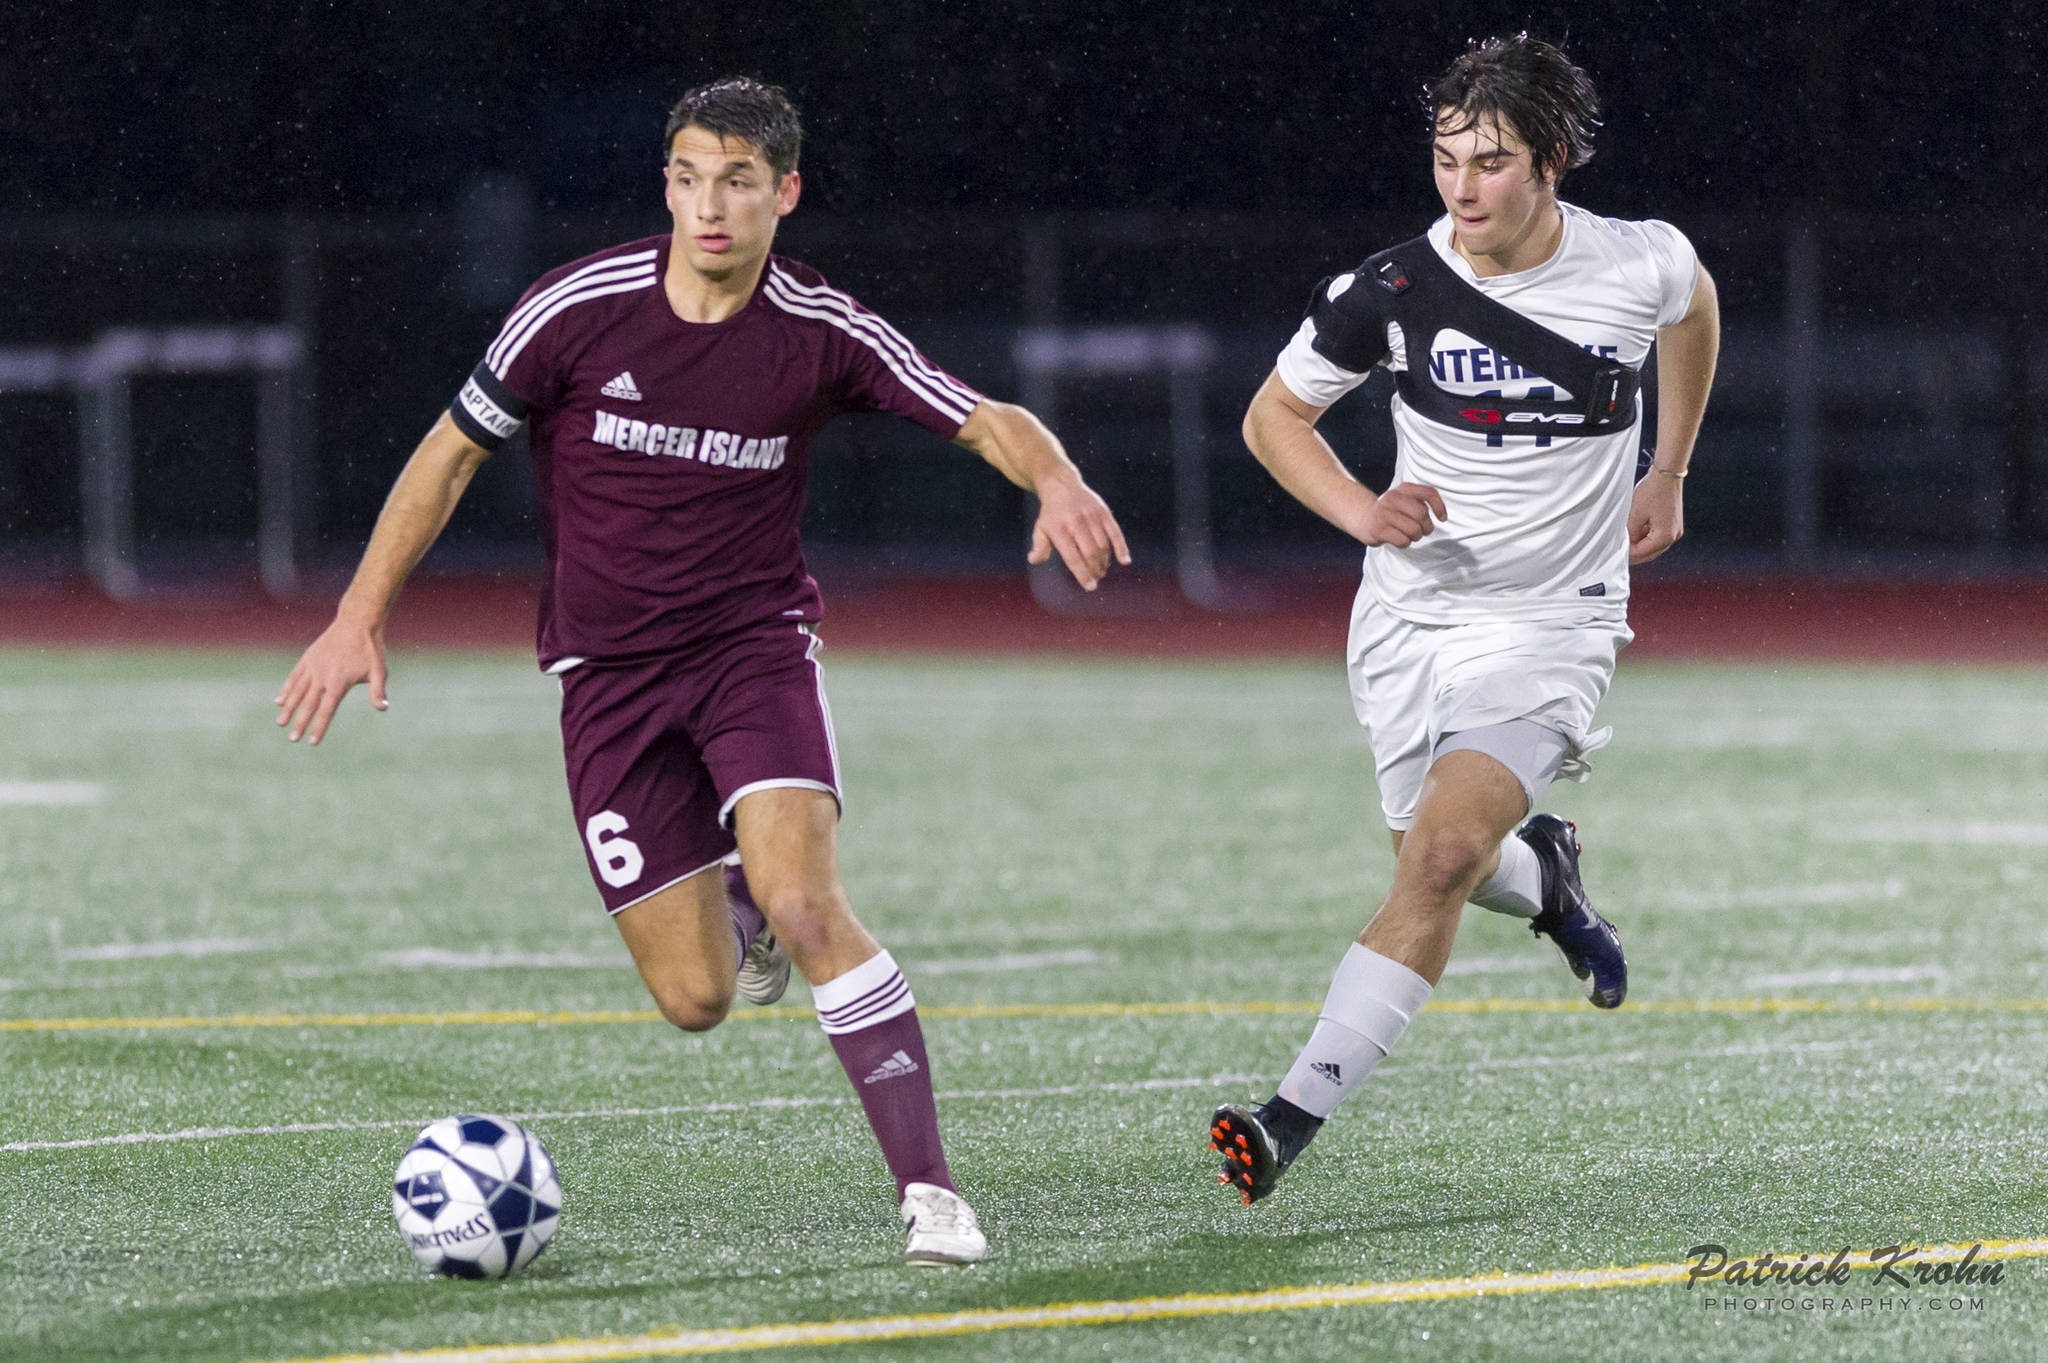 Photo courtesy of Patrick Krohn/Patrick Krohn Photography                                Mercer Island Islanders defender Reis Kissel, left, dribbles the ball upfield while being guarded by Interlake Saints midfielder Andre Garone, right, in a matchup between KingCo 3A teams on April 11 at Interlake High School in Bellevue. Mercer Island defeated Interlake 2-1 in the contest.